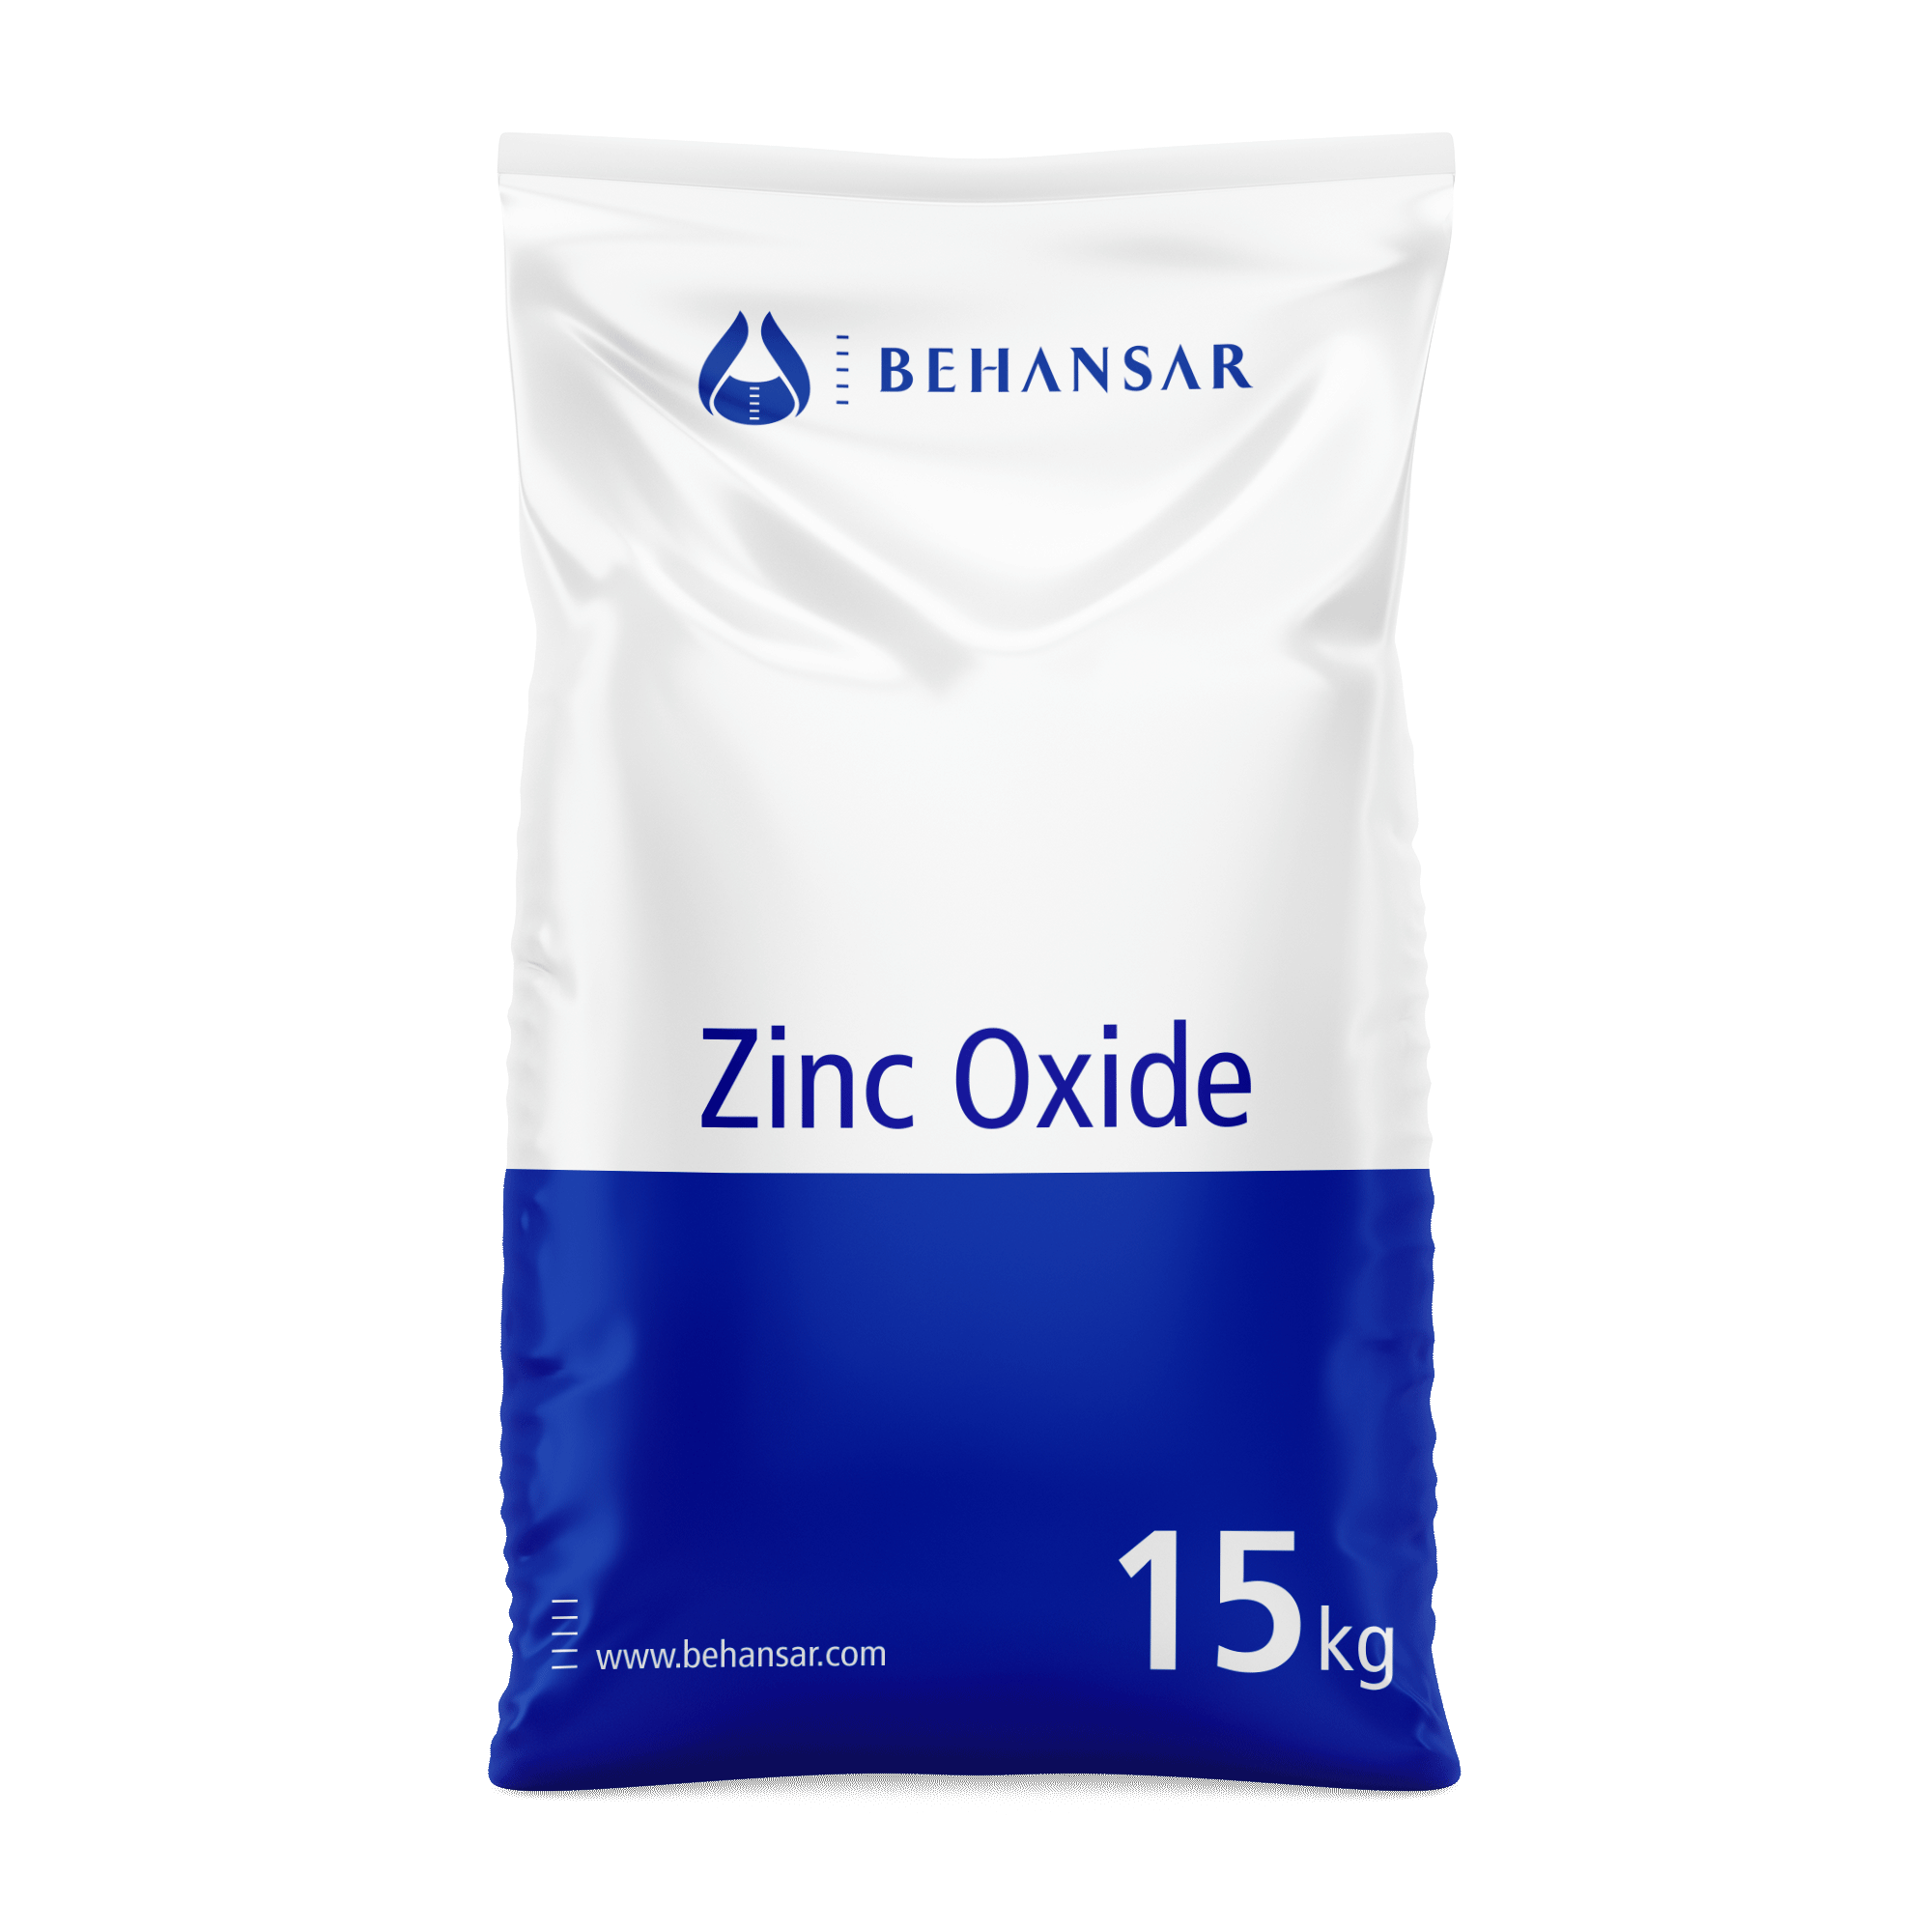 Zinc Oxide is one of the products of Behansar Co